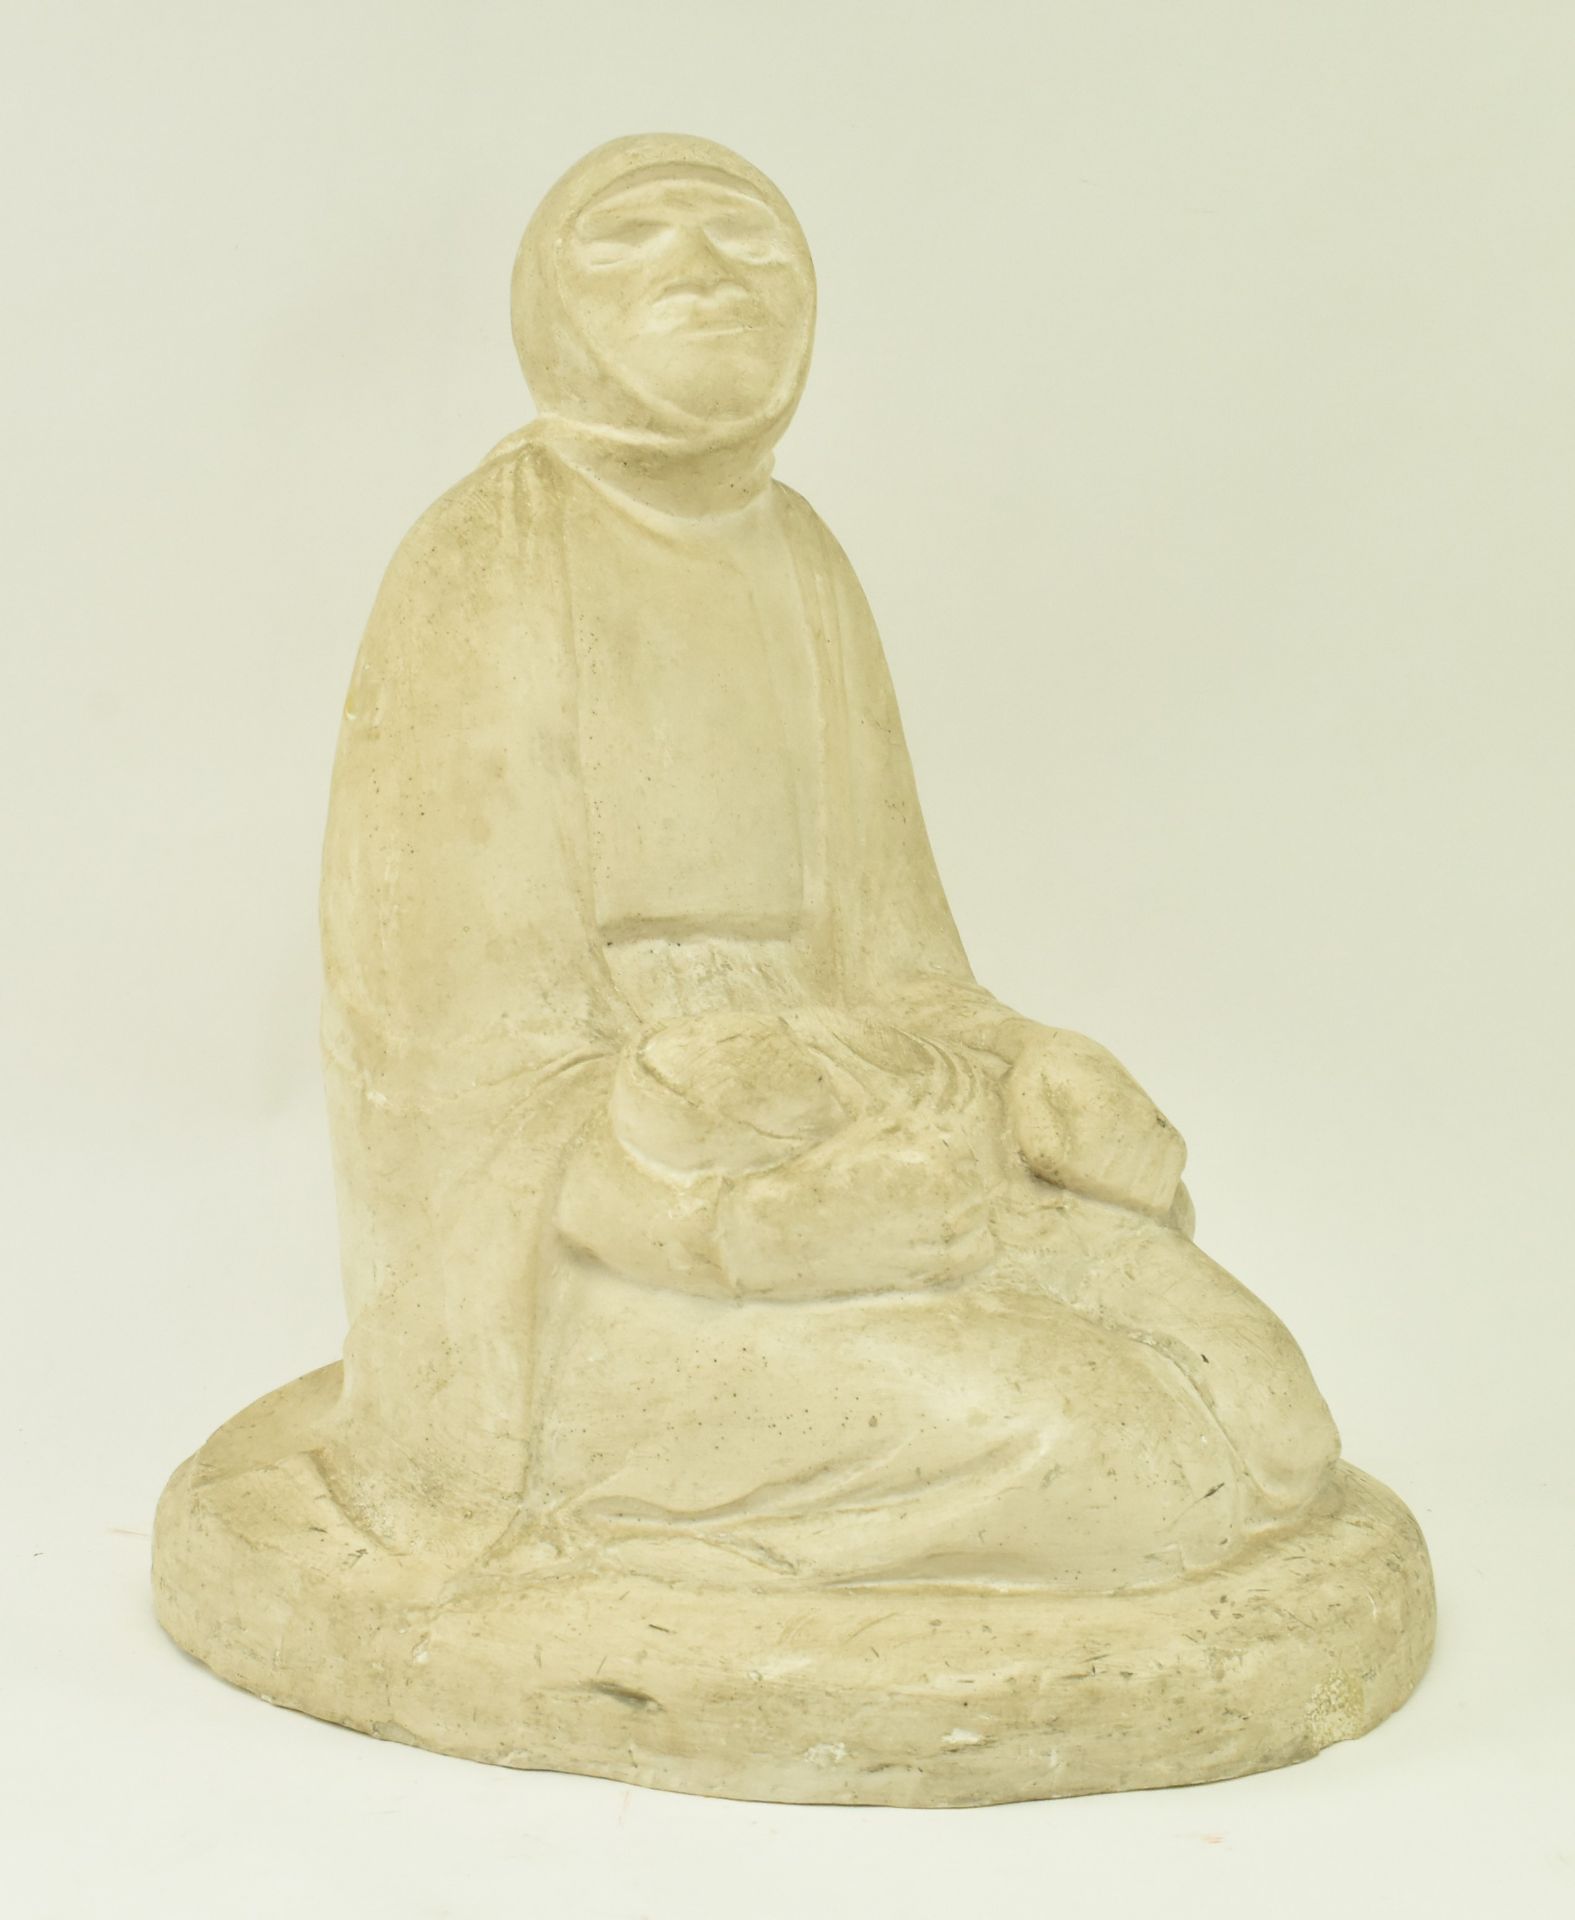 ATTRIBUTED TO ERNST BARLACH - WOMAN WITH CHILD PLASTER FIGURE